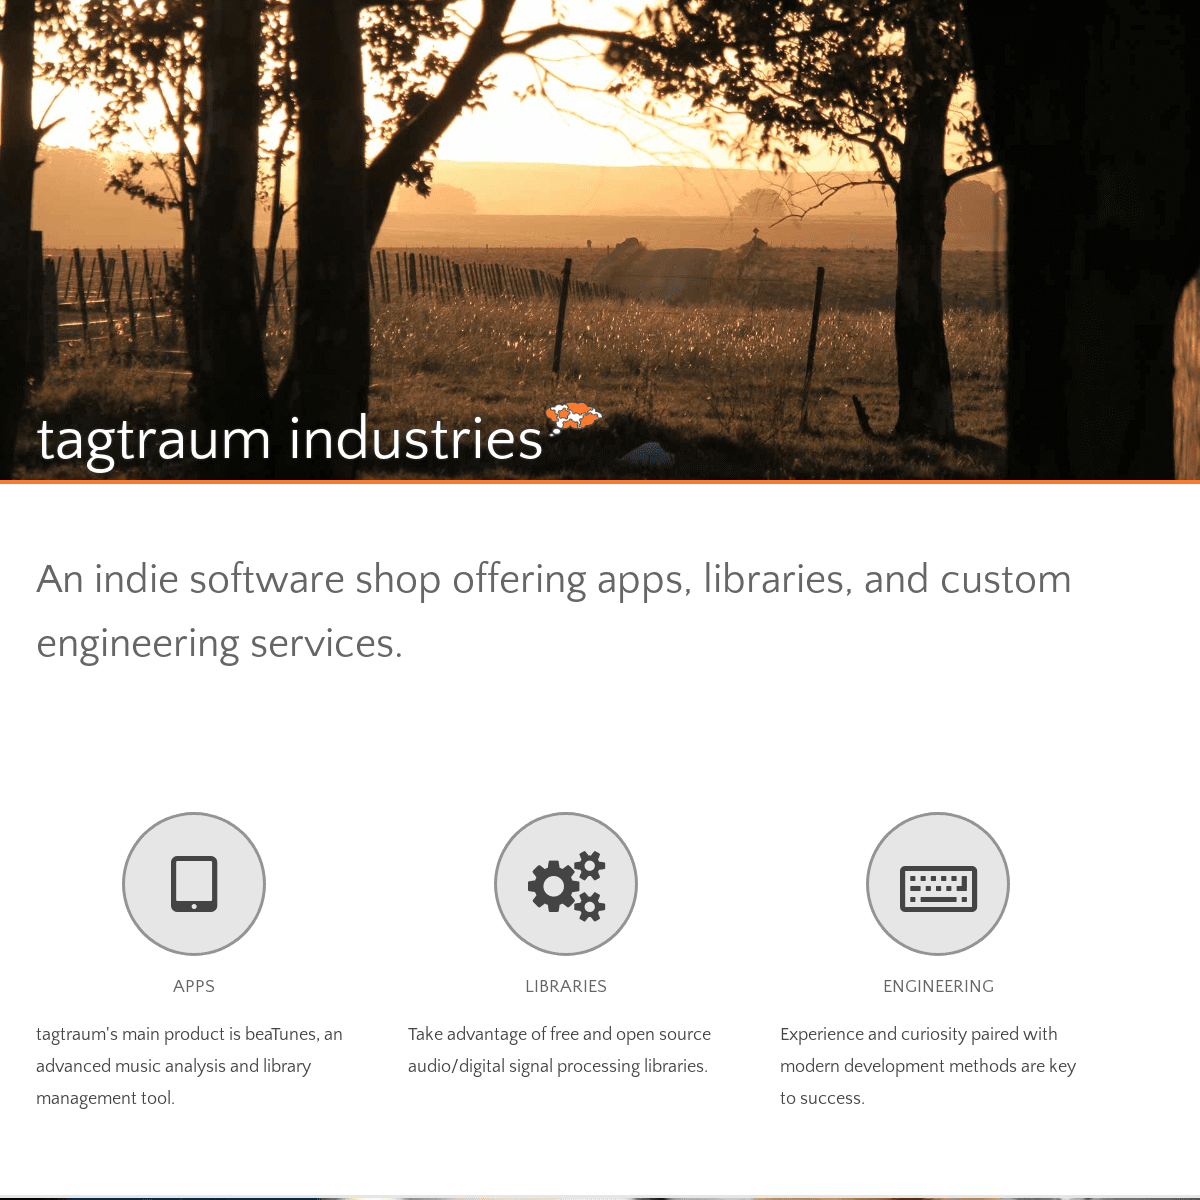 A complete backup of https://tagtraum.com